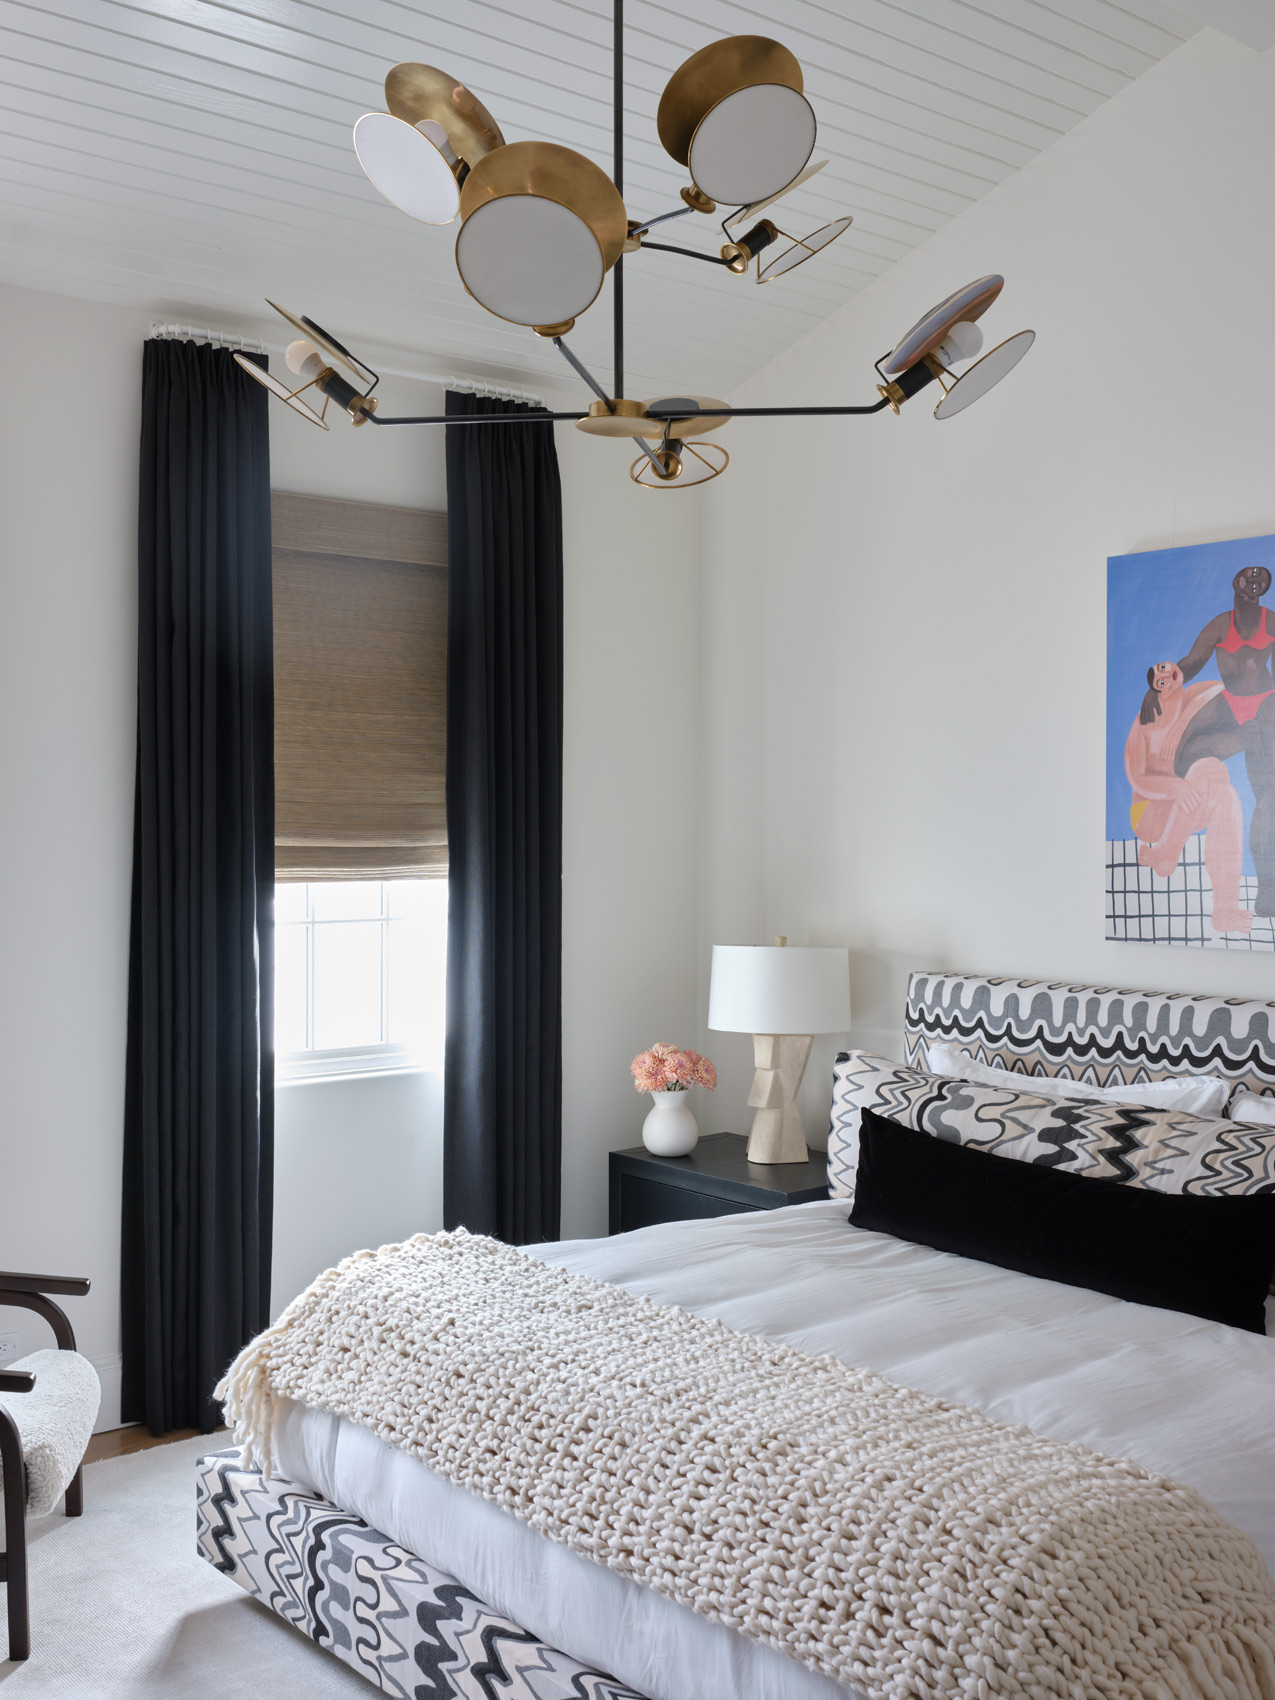 Guest room by Melanie Turner Interiors, photographed for Atlanta Homes and Lifestyles by Mali Azima..